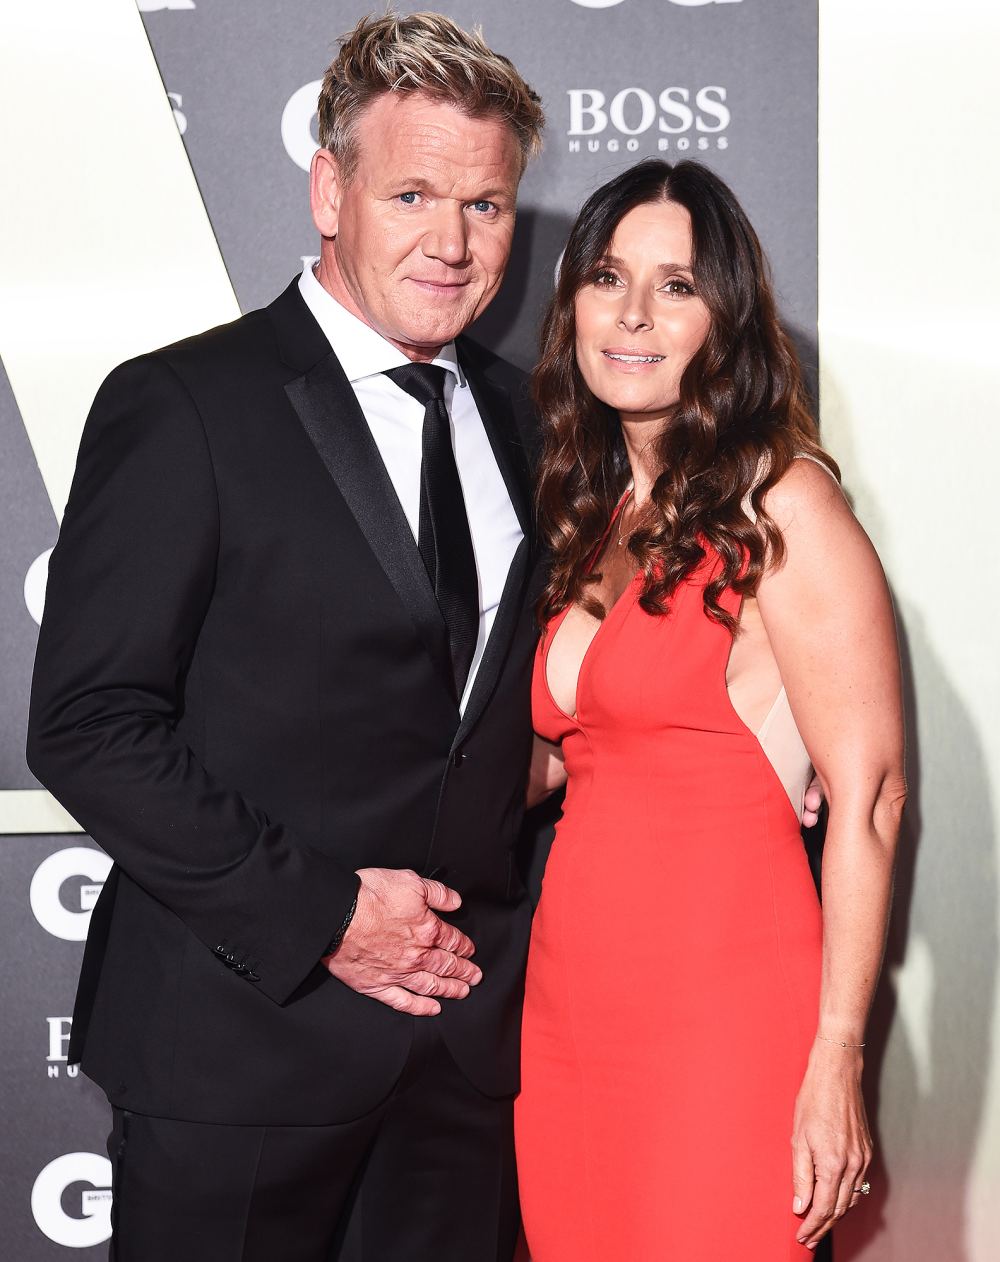 Gordon Ramsay’s Wife Tana Shares How Amazing Chef Supported Her After 2016 Pregnancy Loss